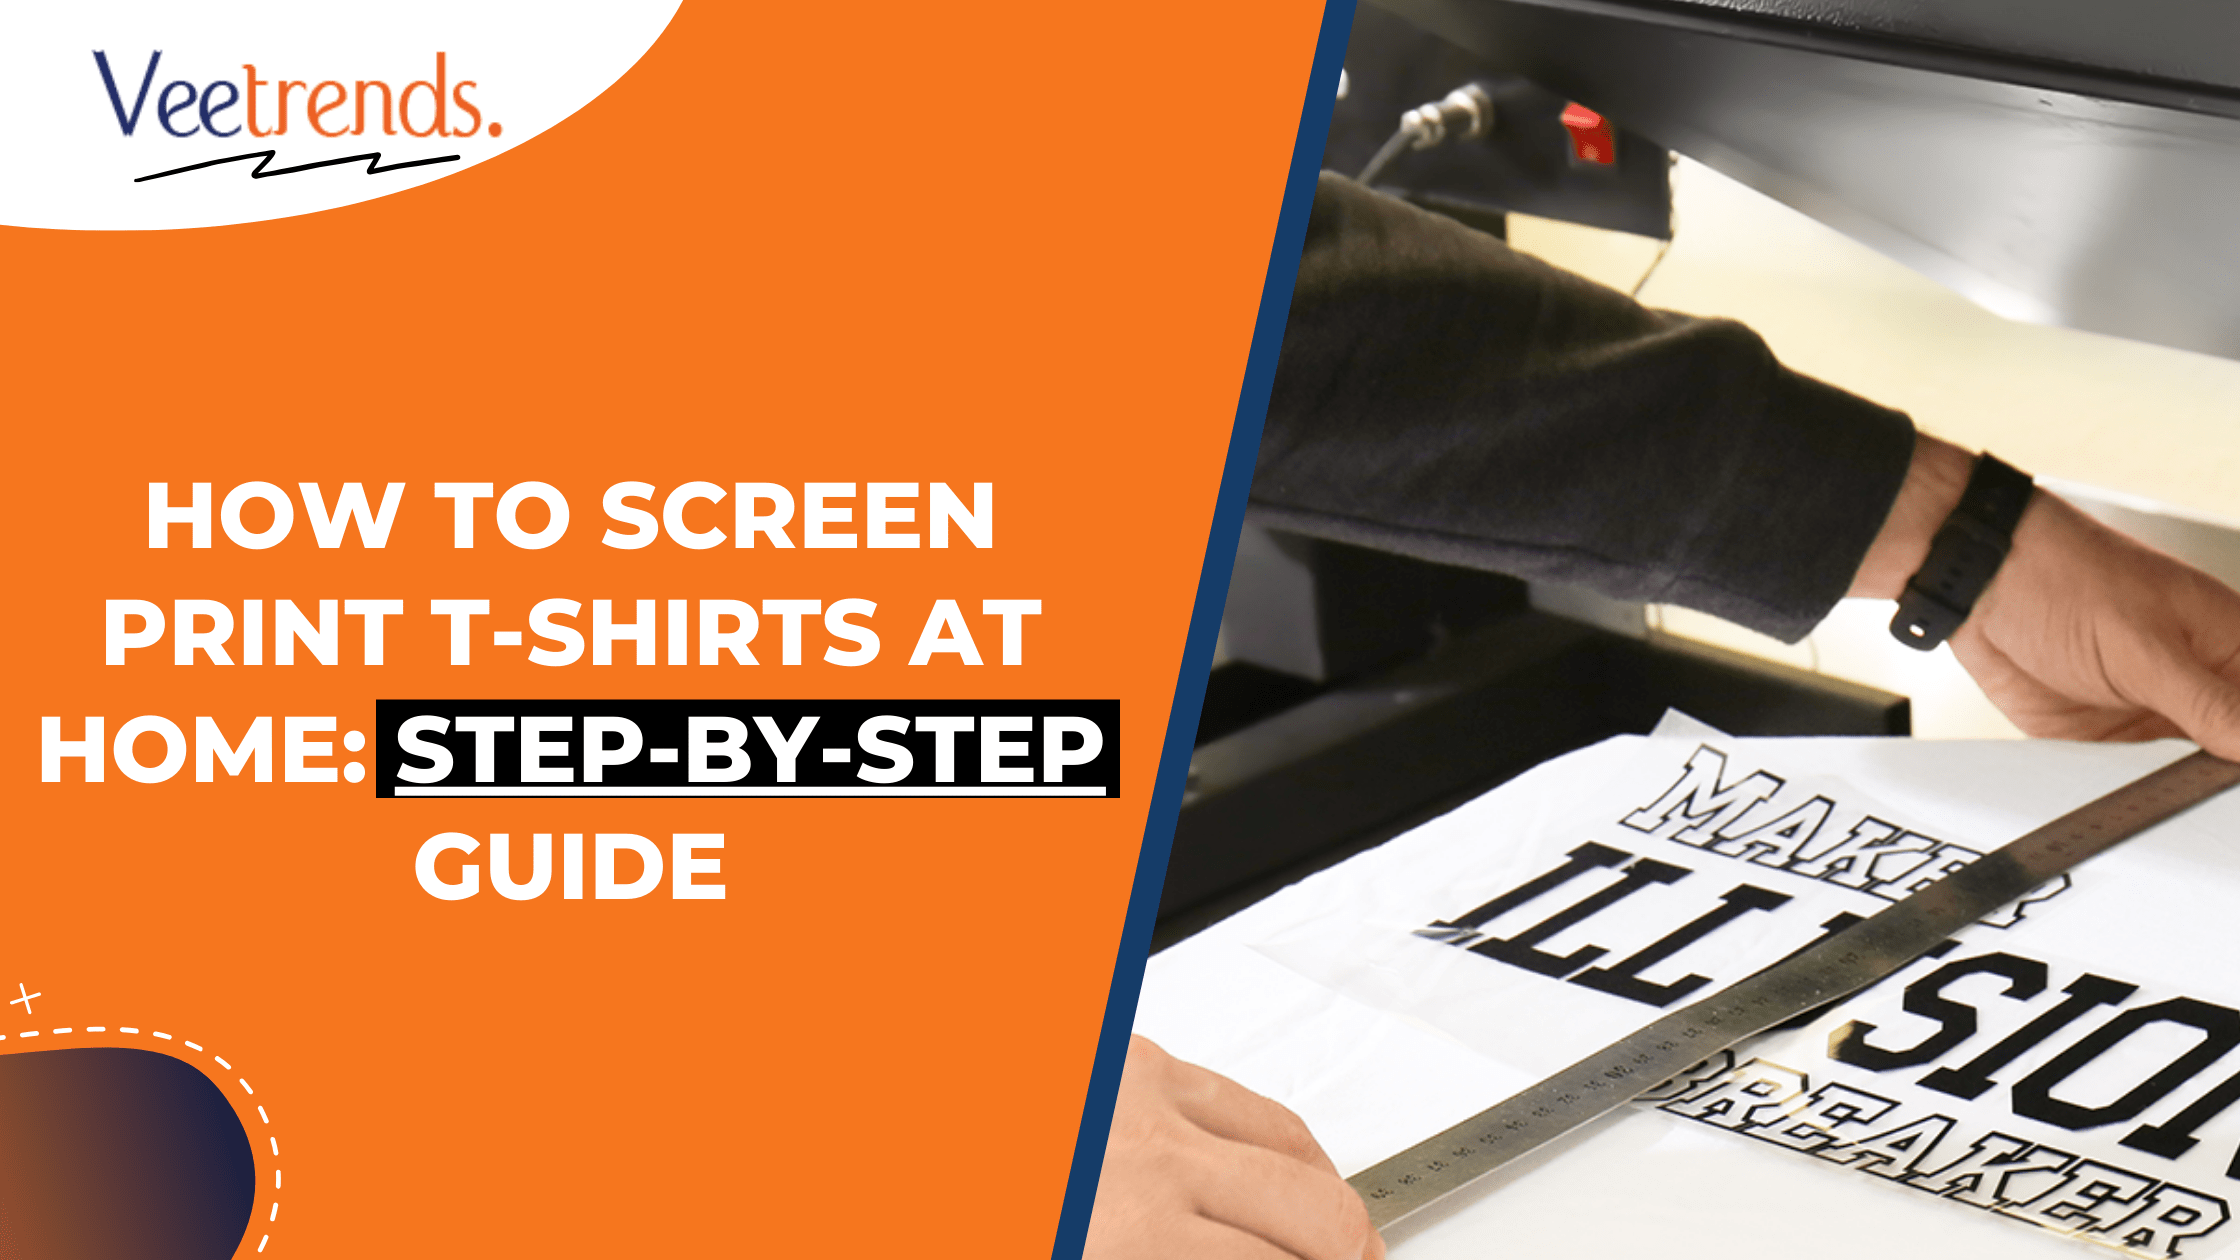 How to print a t-shirt: a step-by-step guide to t-shirt printing